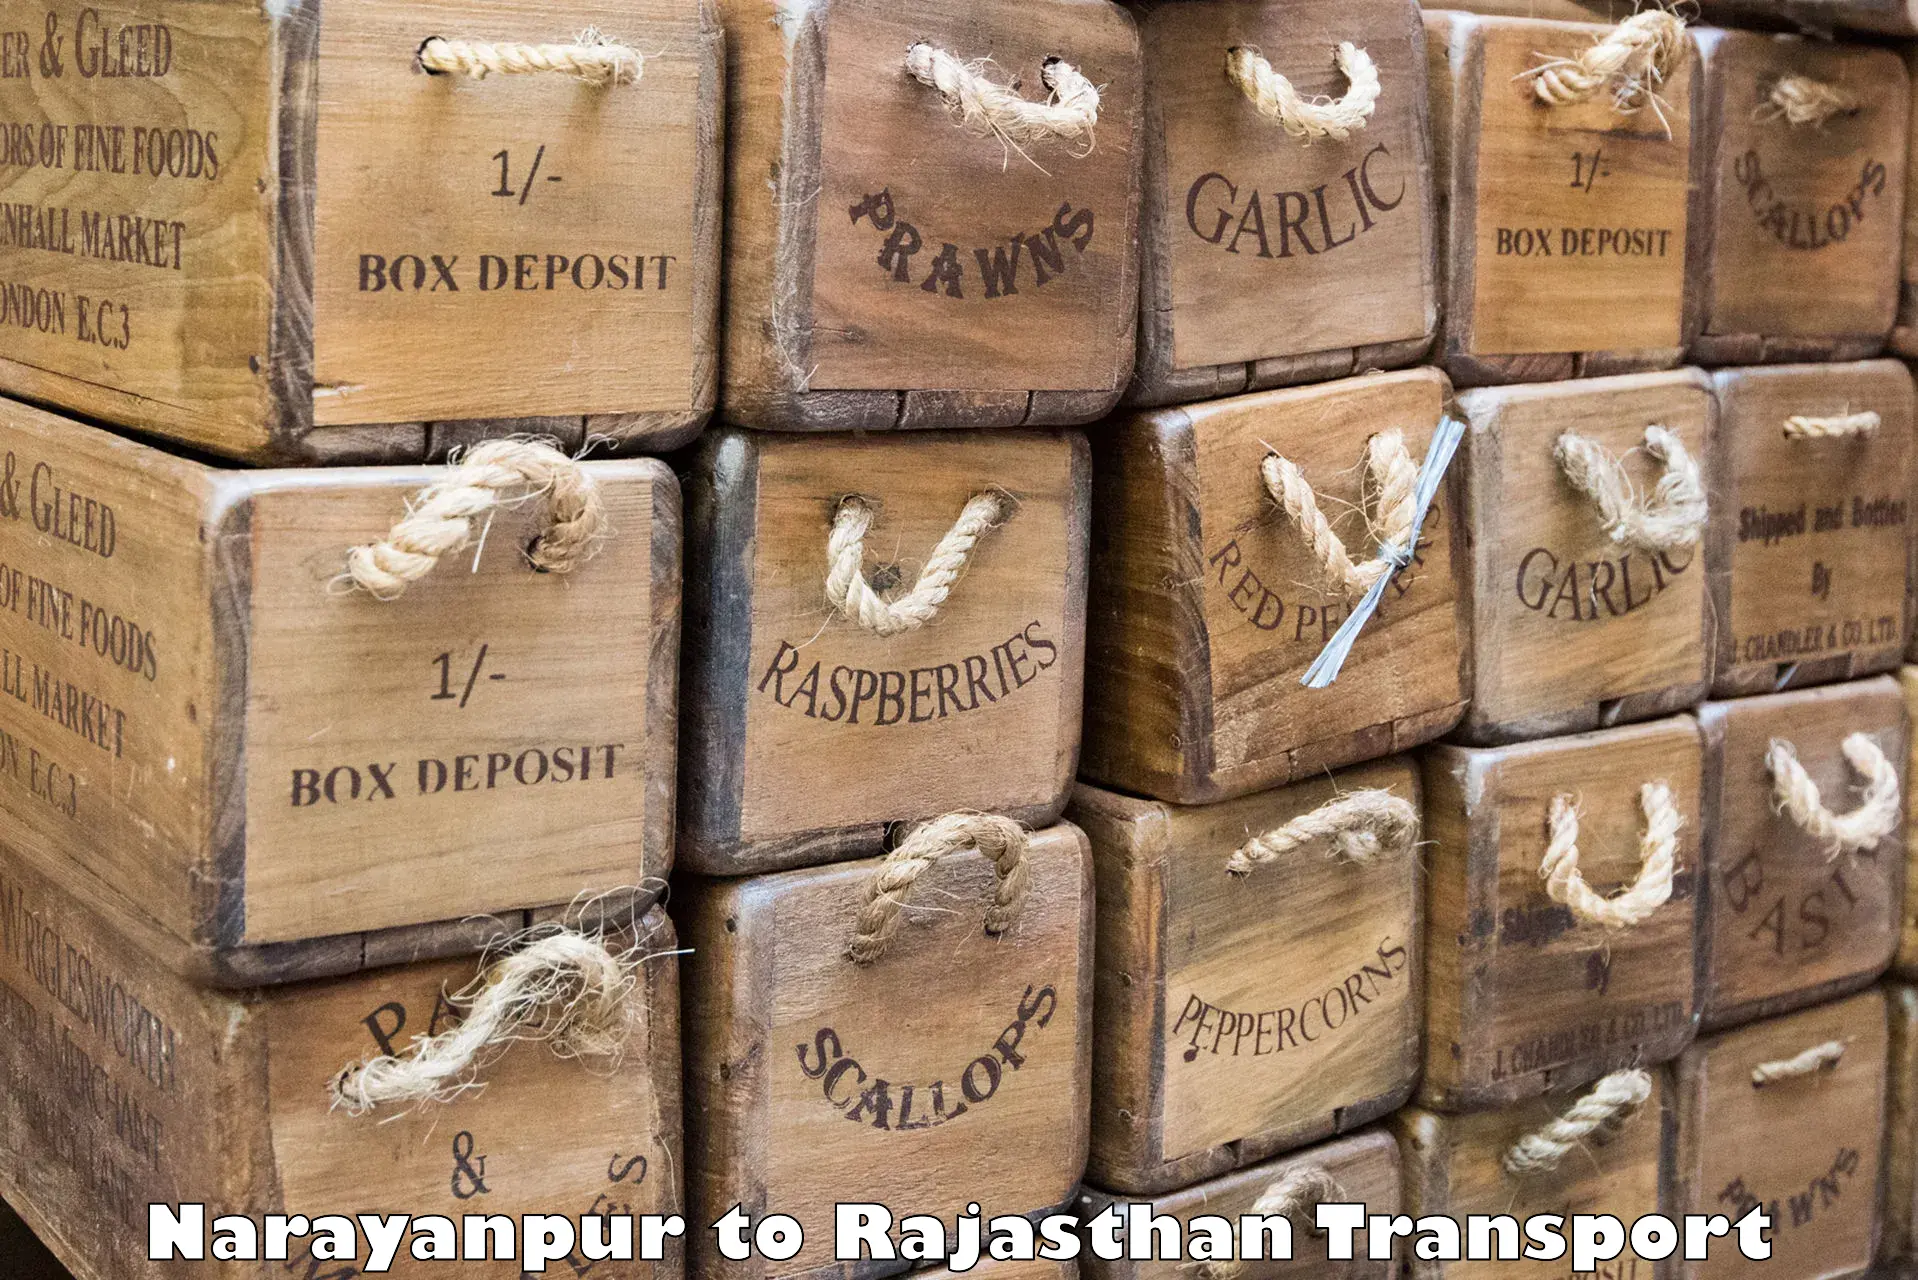 Air cargo transport services in Narayanpur to Karauli